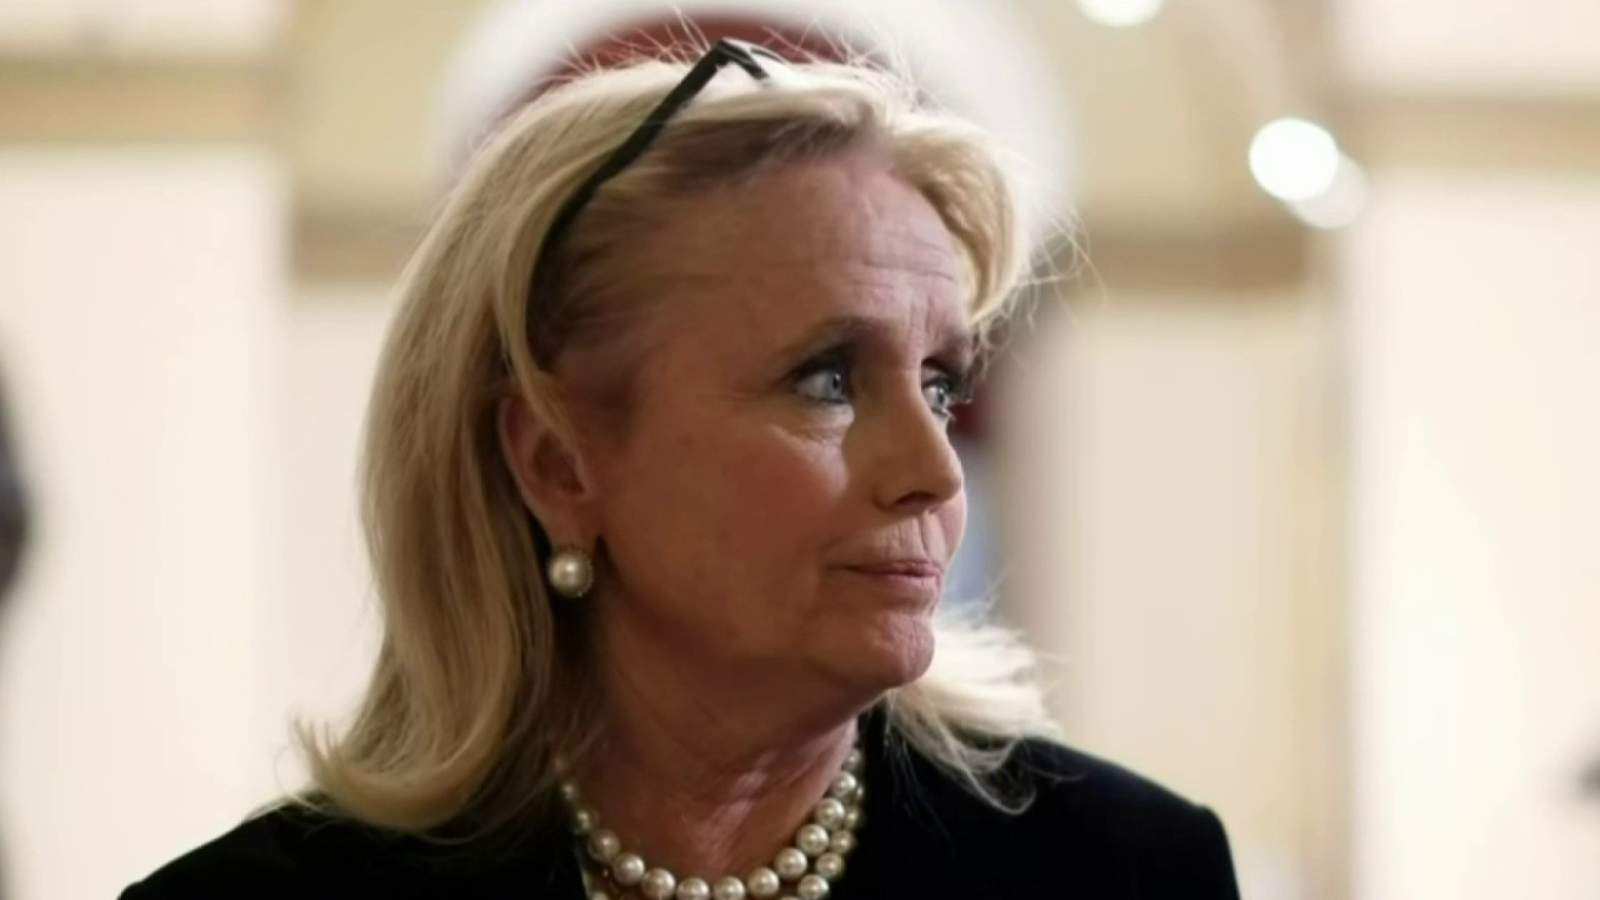 Rep. Debbie Dingell pushes own vaccine fears aside to set example for others